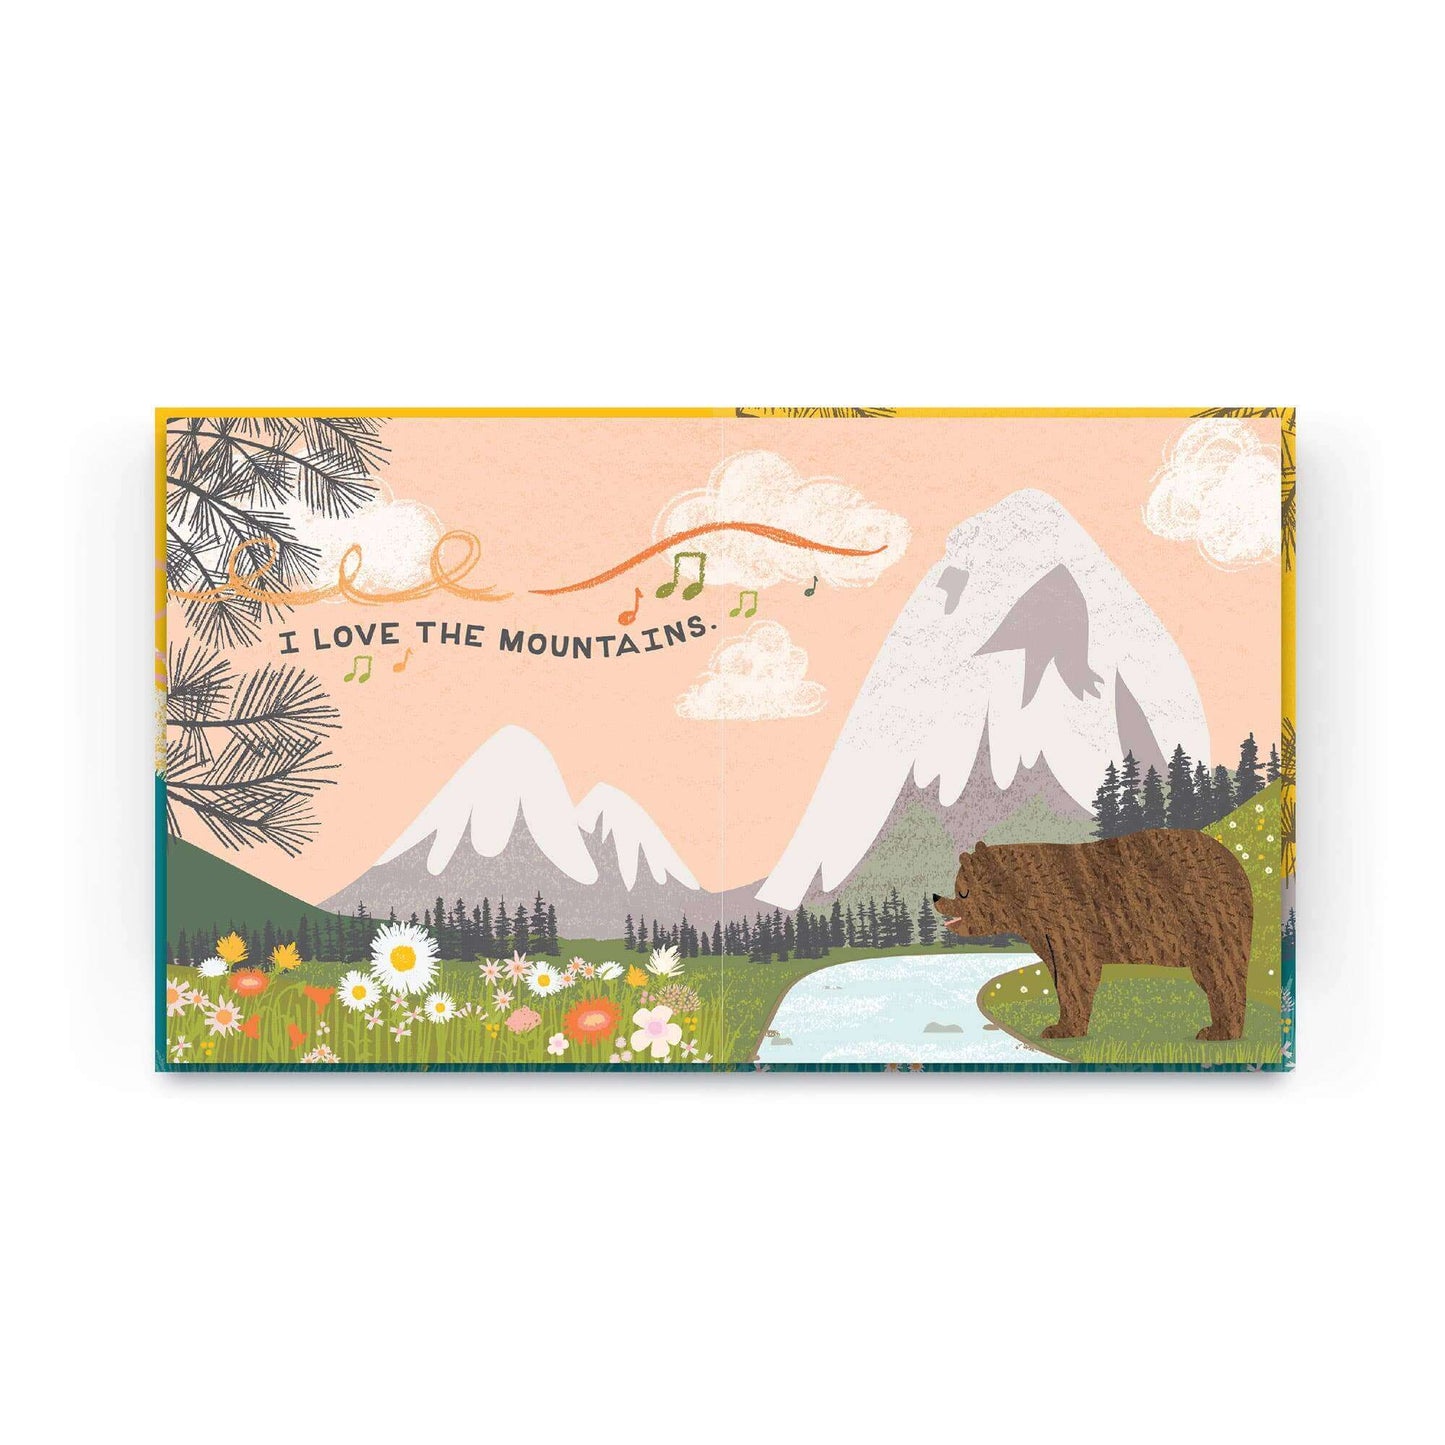 I love the Mountains, Lucy Darling, eco-friendly Toys, Mountain Kids Toys